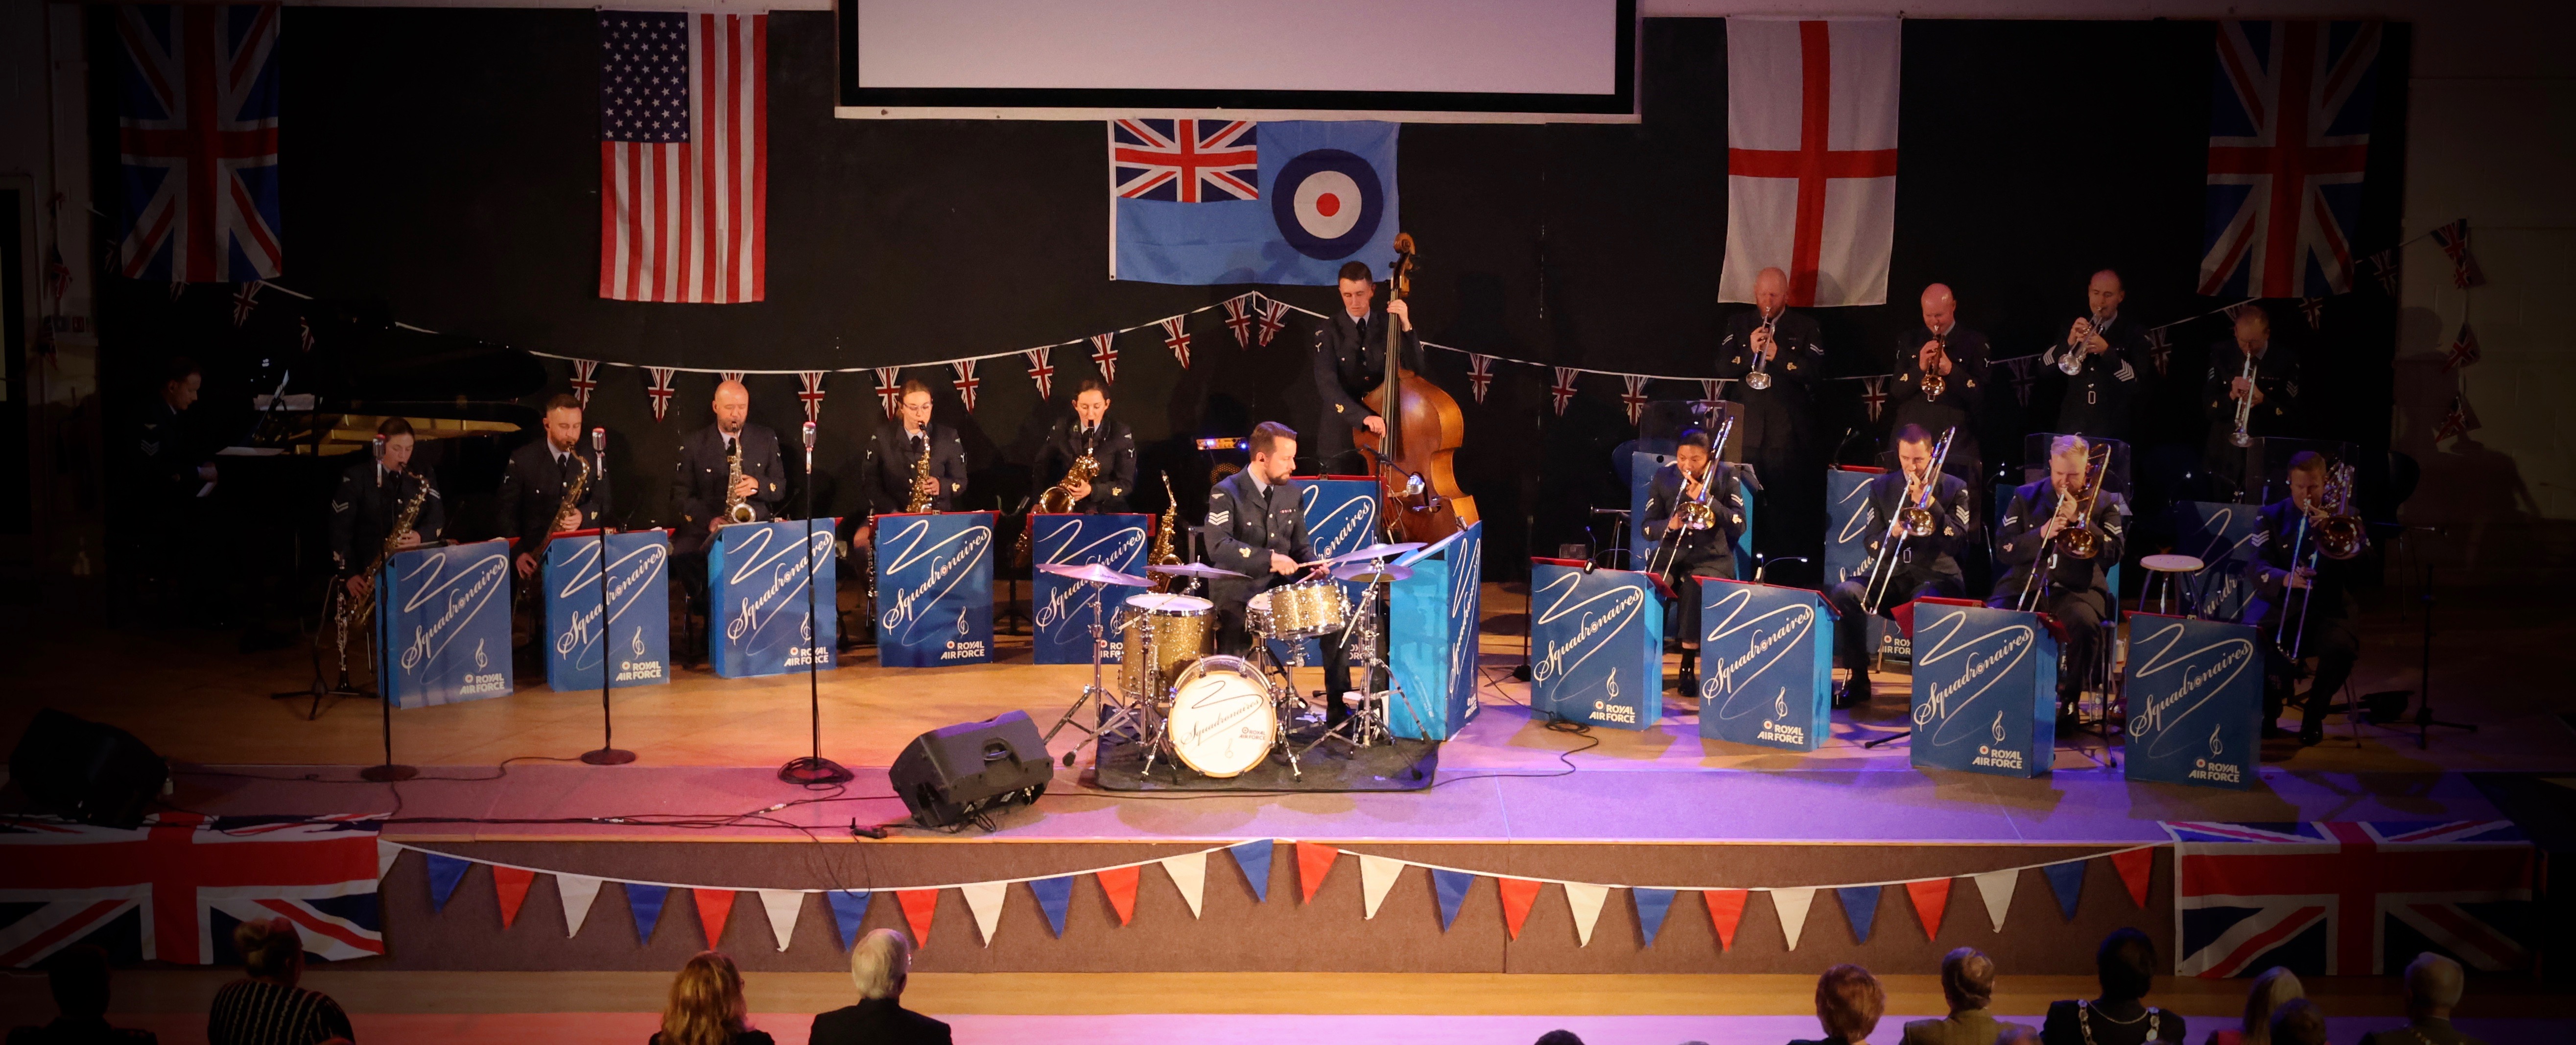 RAF Squadronaires performing on stage